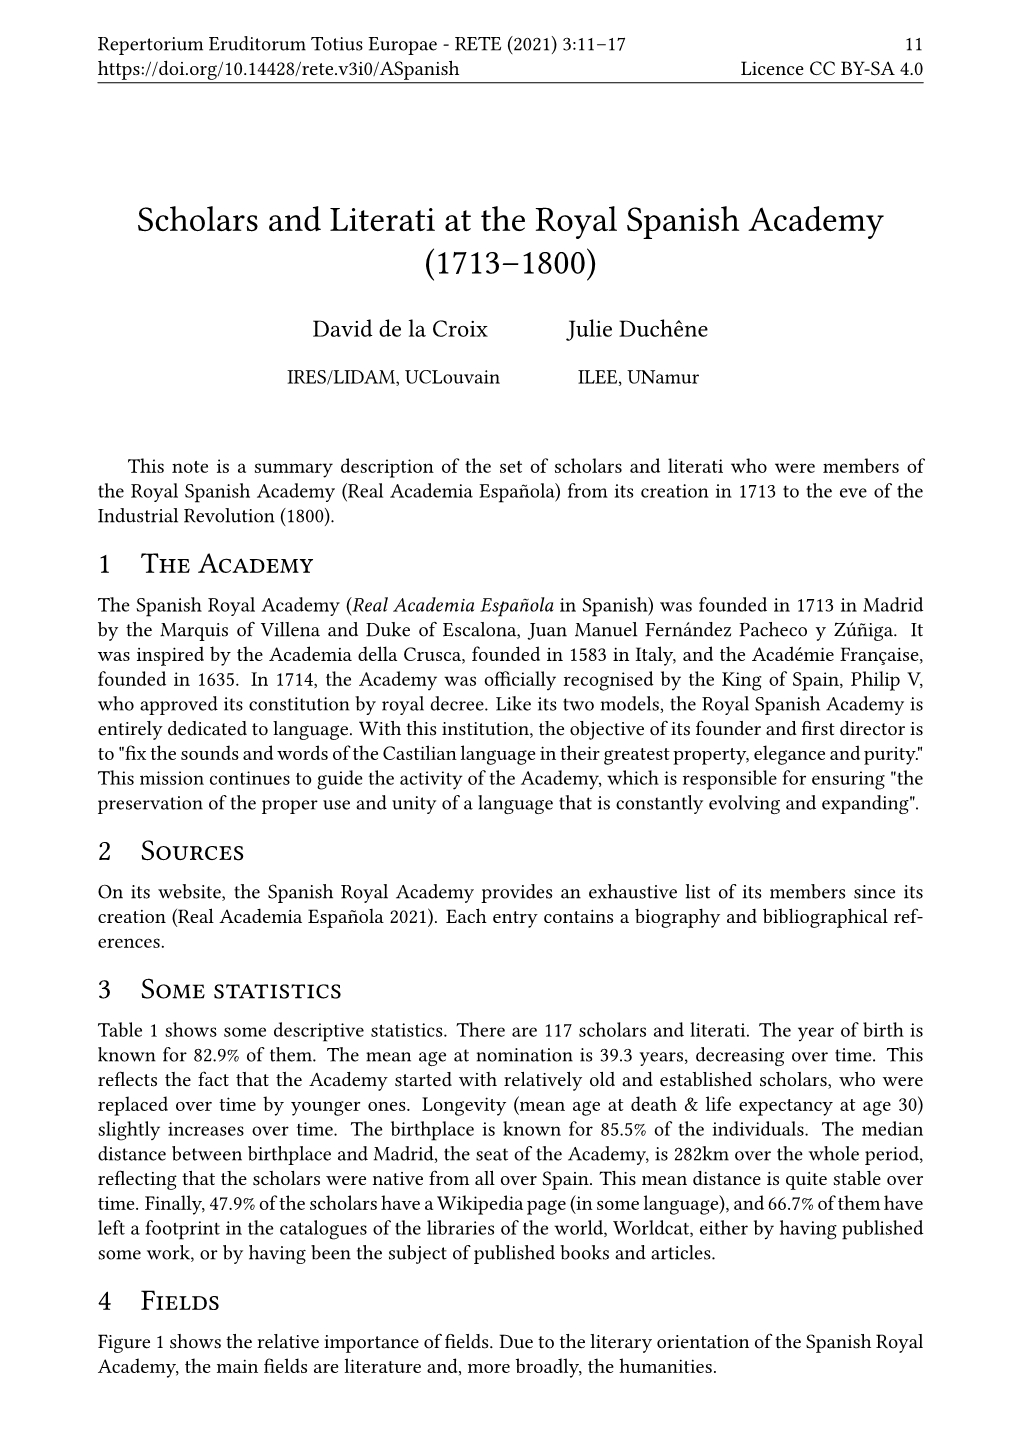 Scholars and Literati at the Royal Spanish Academy (1713–1800)